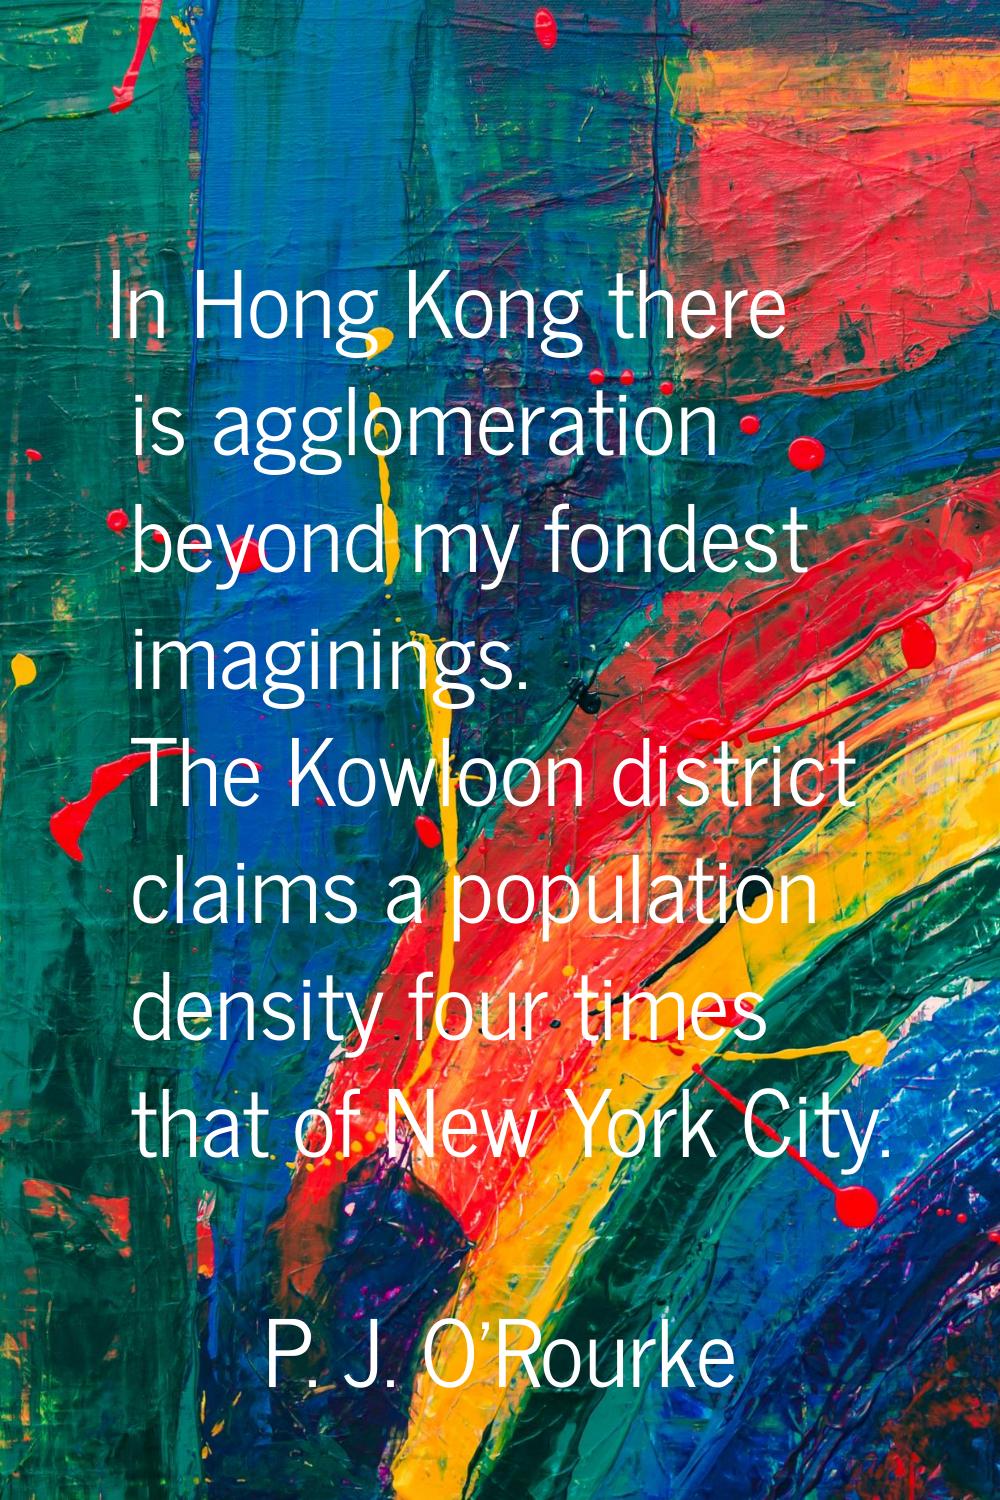 In Hong Kong there is agglomeration beyond my fondest imaginings. The Kowloon district claims a pop